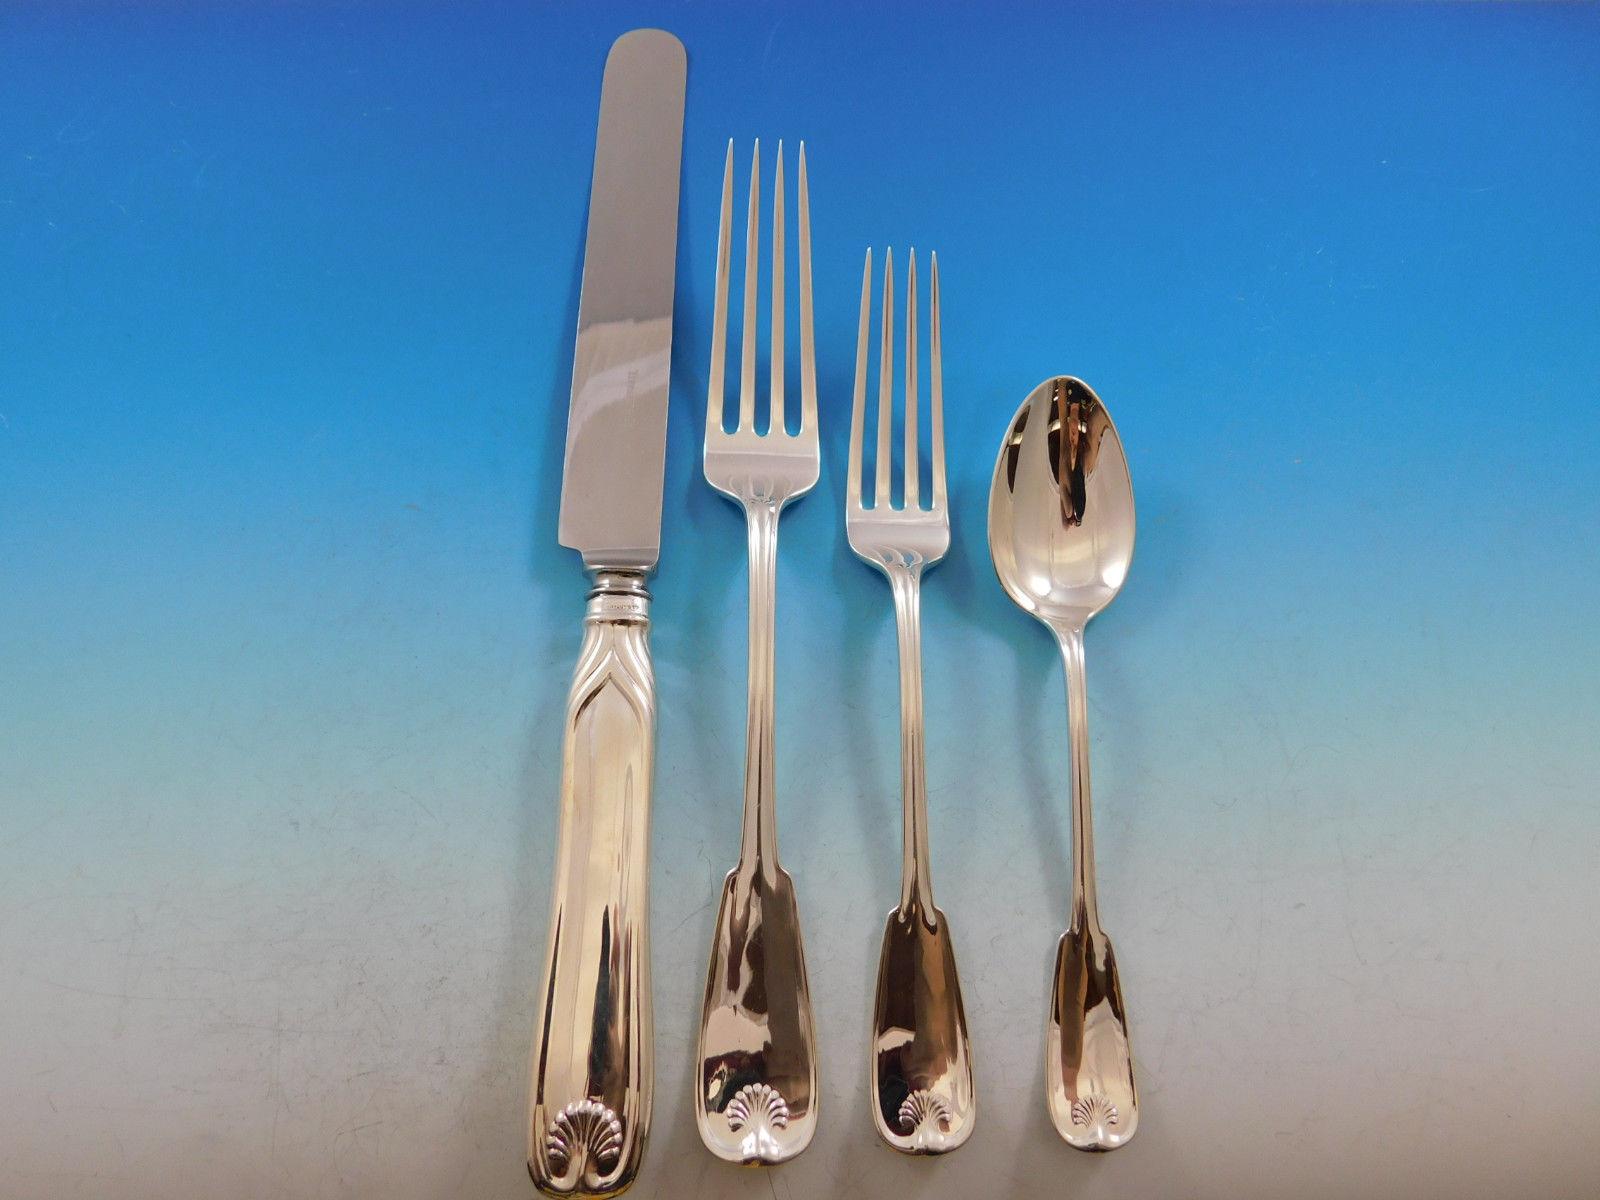 Superb rare dinner and luncheon Palm by Tiffany & Co. sterling silver flatware set of 75 pieces. This pattern was patented in the year 1871 and features a fiddle shaped handle, a stylized palm, and a thread border. This set includes: 

12 dinner